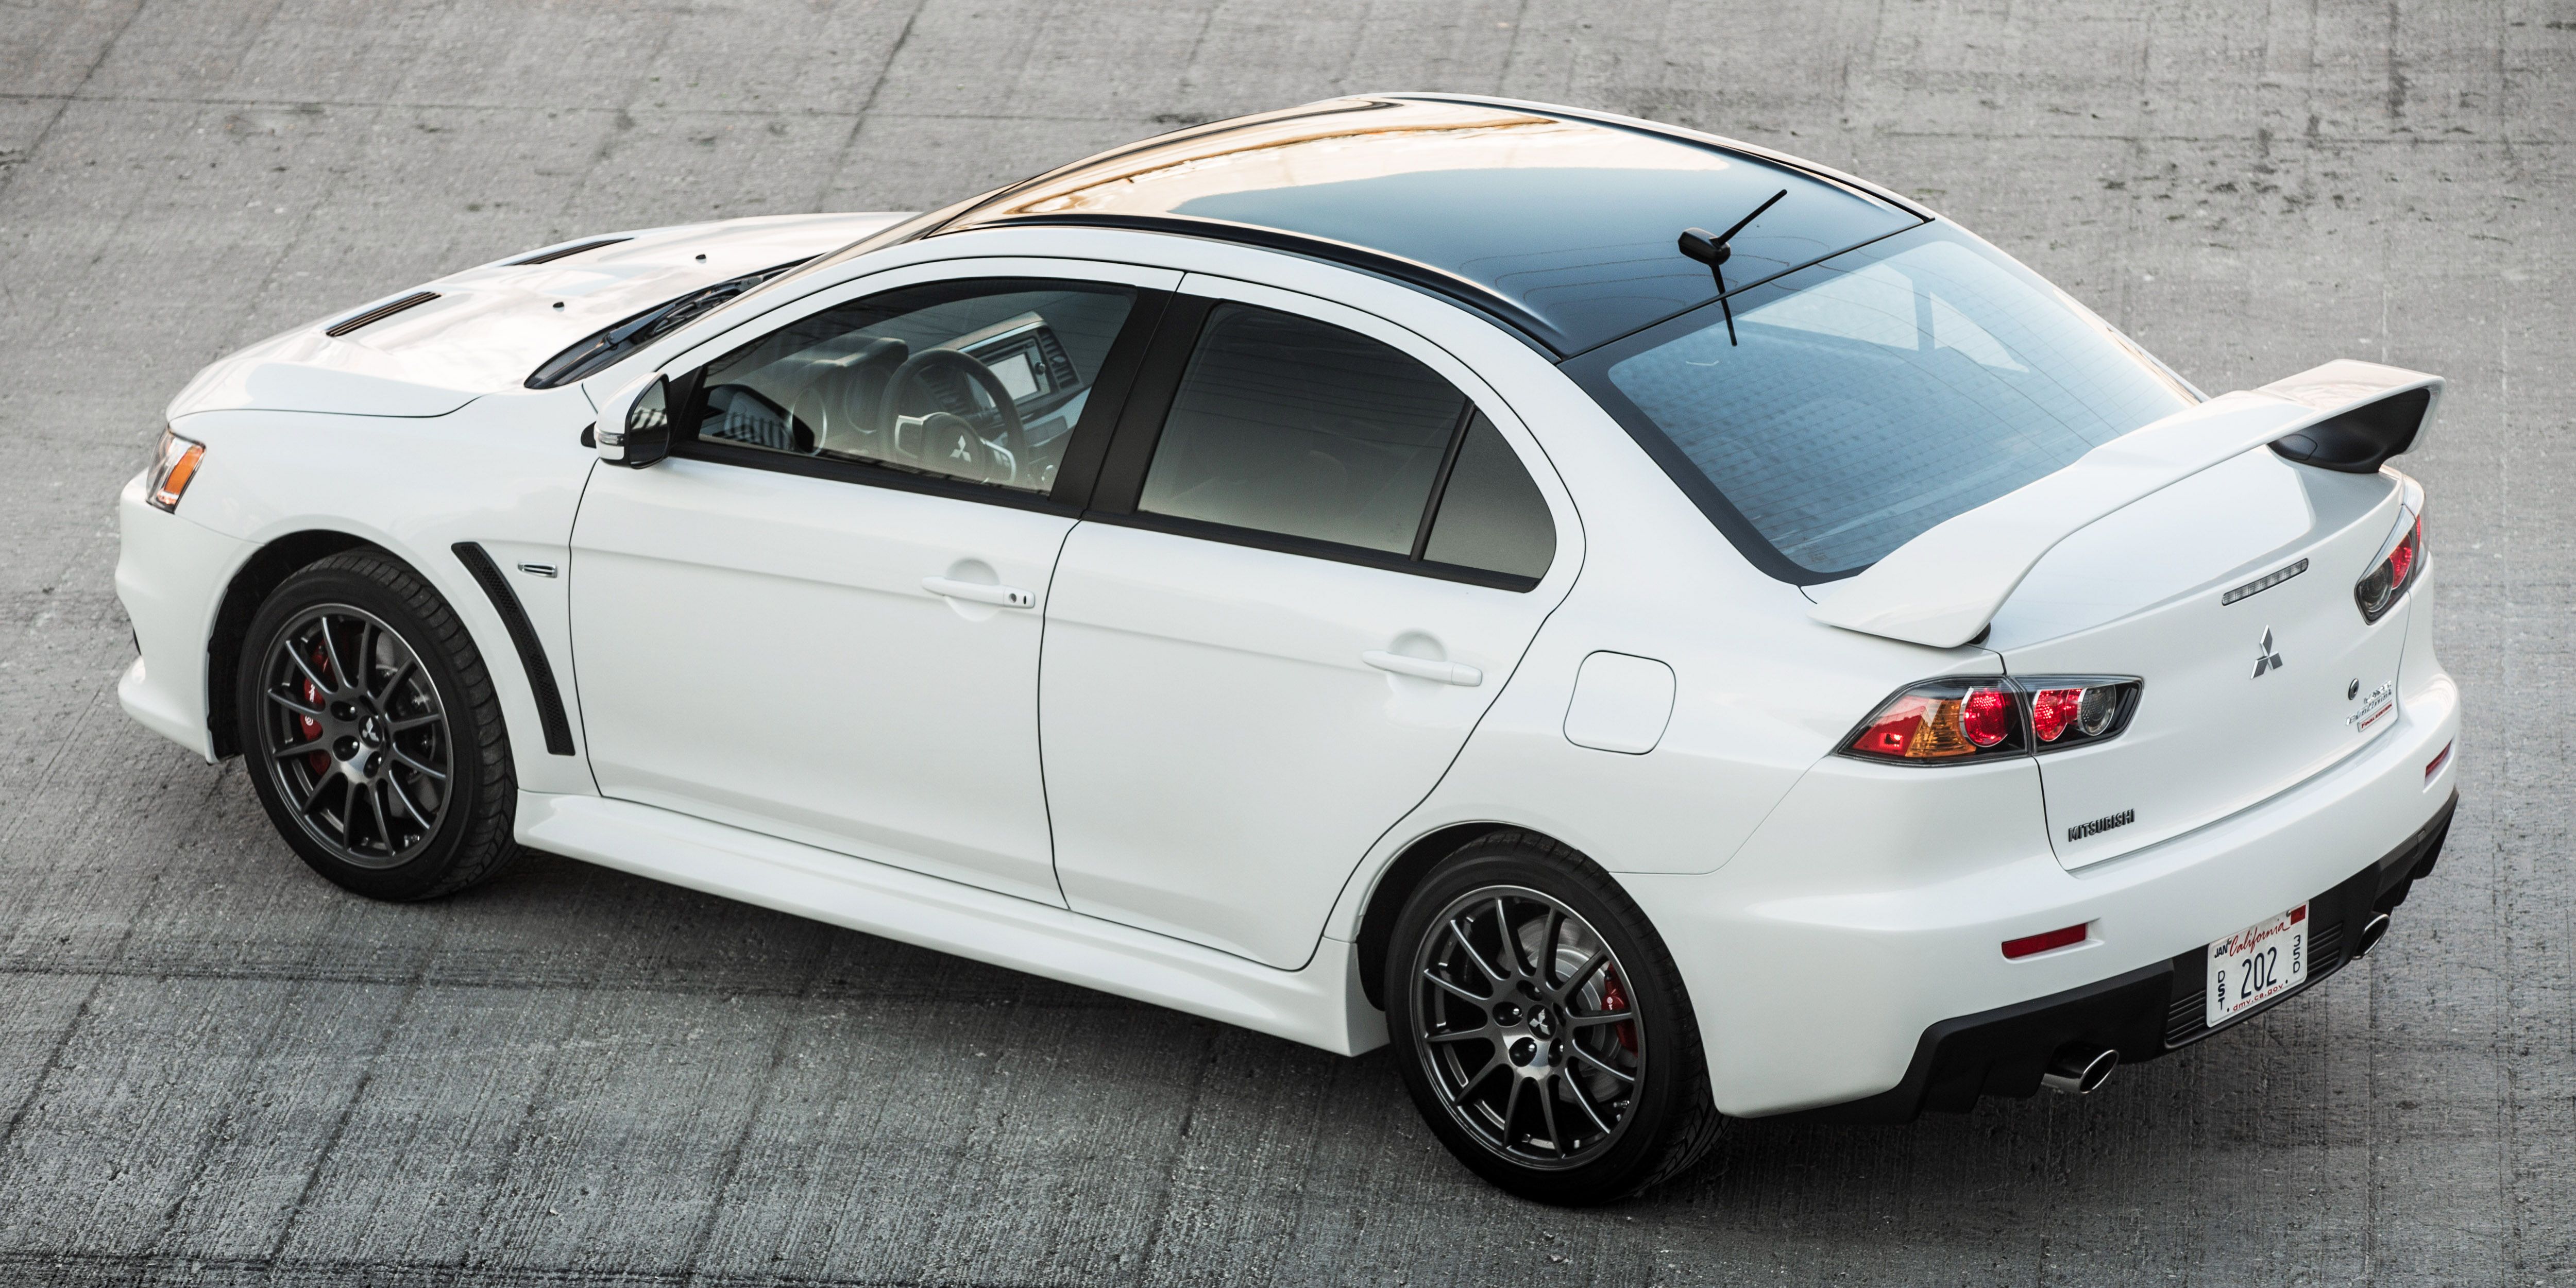 The Last Mitsubishi Lancer Evo X Ever Built Sold for $76,400